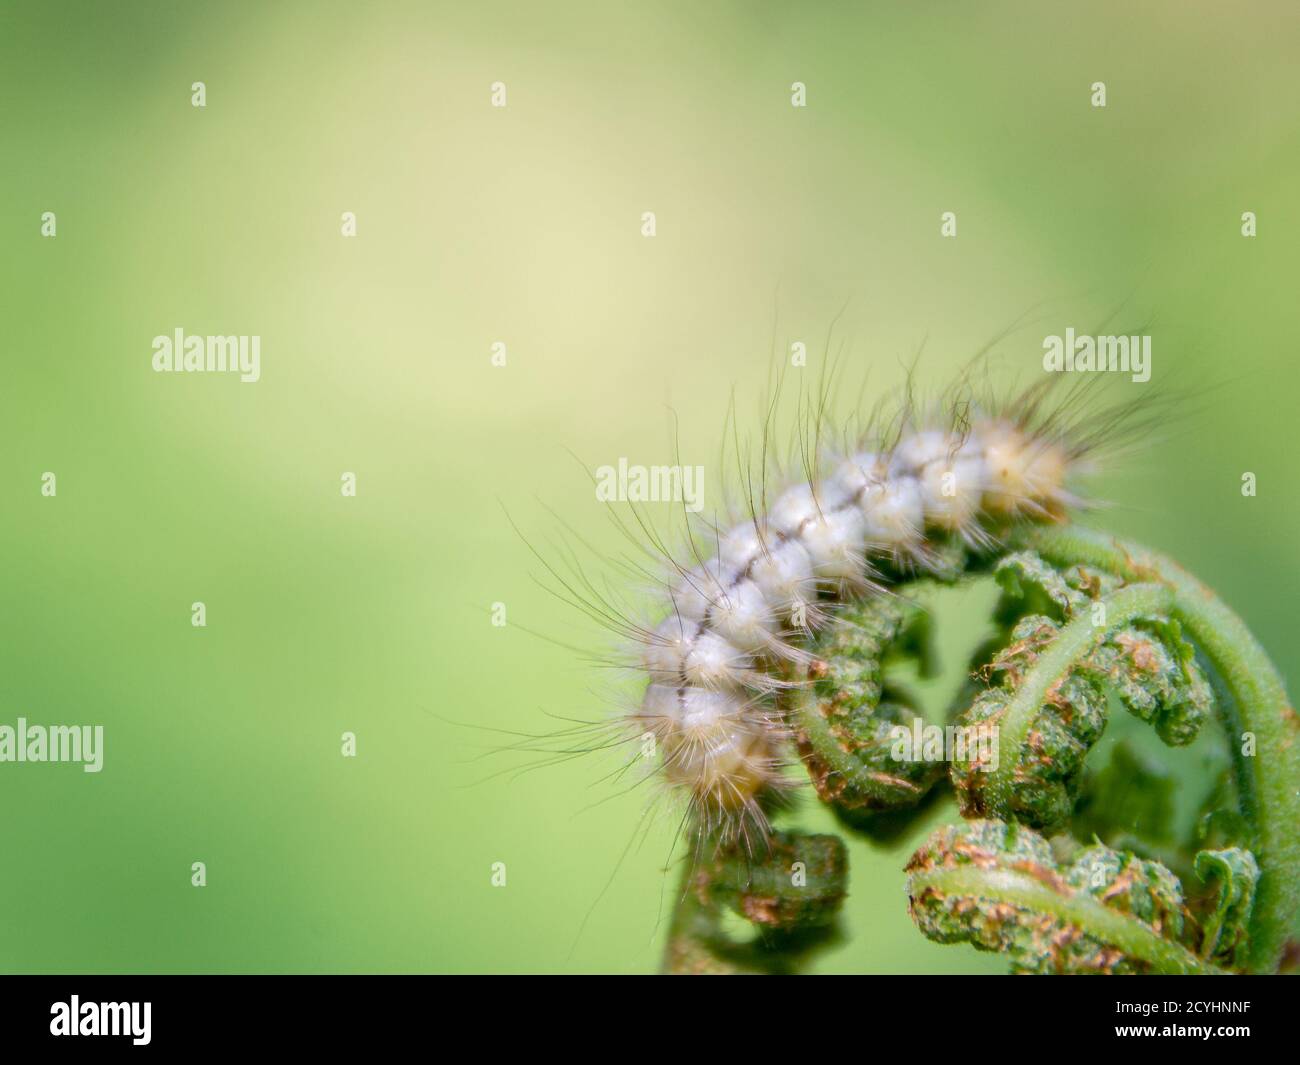 white hairy caterpillar on fern shoots with place for text, selective focus Stock Photo